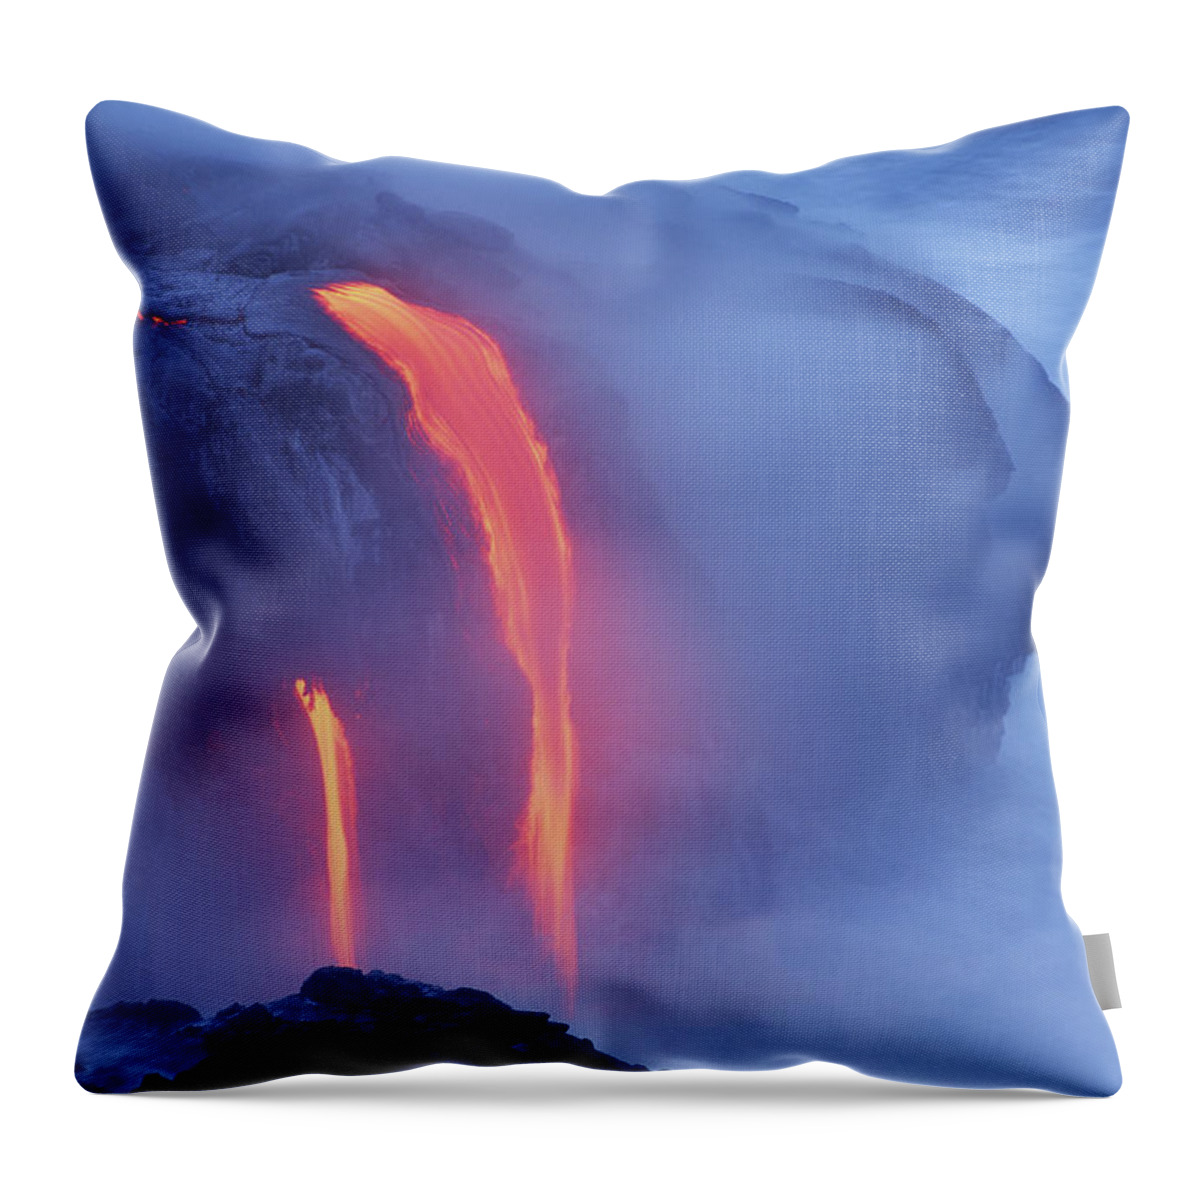 Hawaii Volcanoes National Park Throw Pillow featuring the photograph Usa, Hawaii, Big Island, Volcanoes Np by Art Wolfe